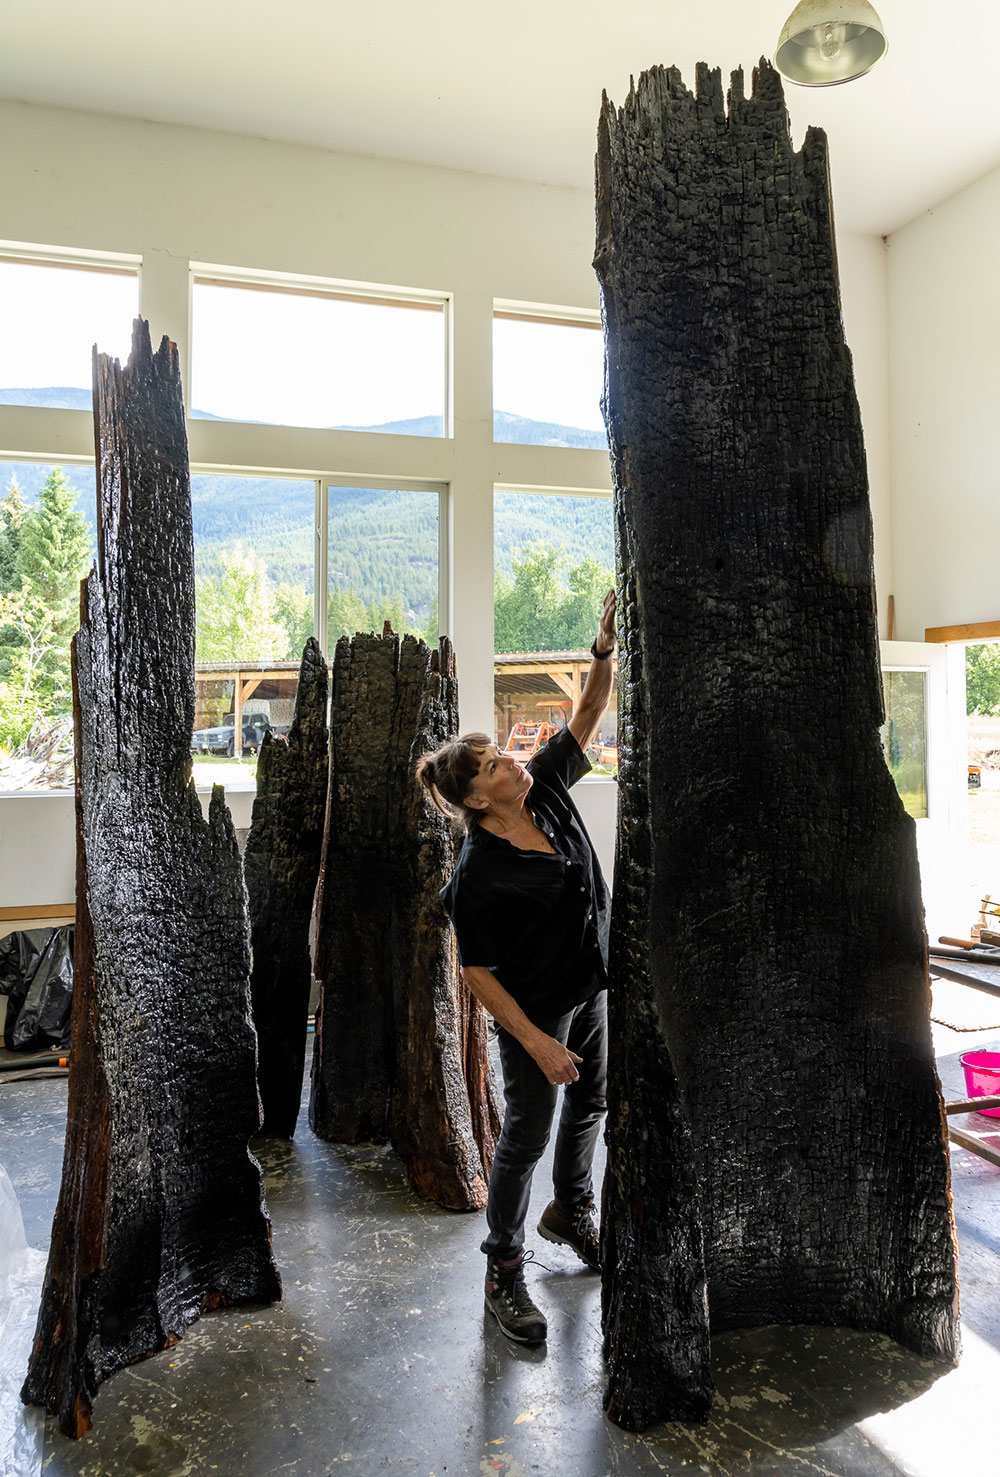 Martha Sturdy is in the centre of the frame, working in her studio earlier this year. Her brown hair is tied back in a loose bun and bangs frame her face. She is wearing black and reaching up to a charred piece of timbre part of her <em>All Fall Down</em> exhibition. She is surrounded by other similar pieces of wood. The studio floor is grey laminate. Behind her through the large windows cut into white walls, one can see a sunny mountain range.  